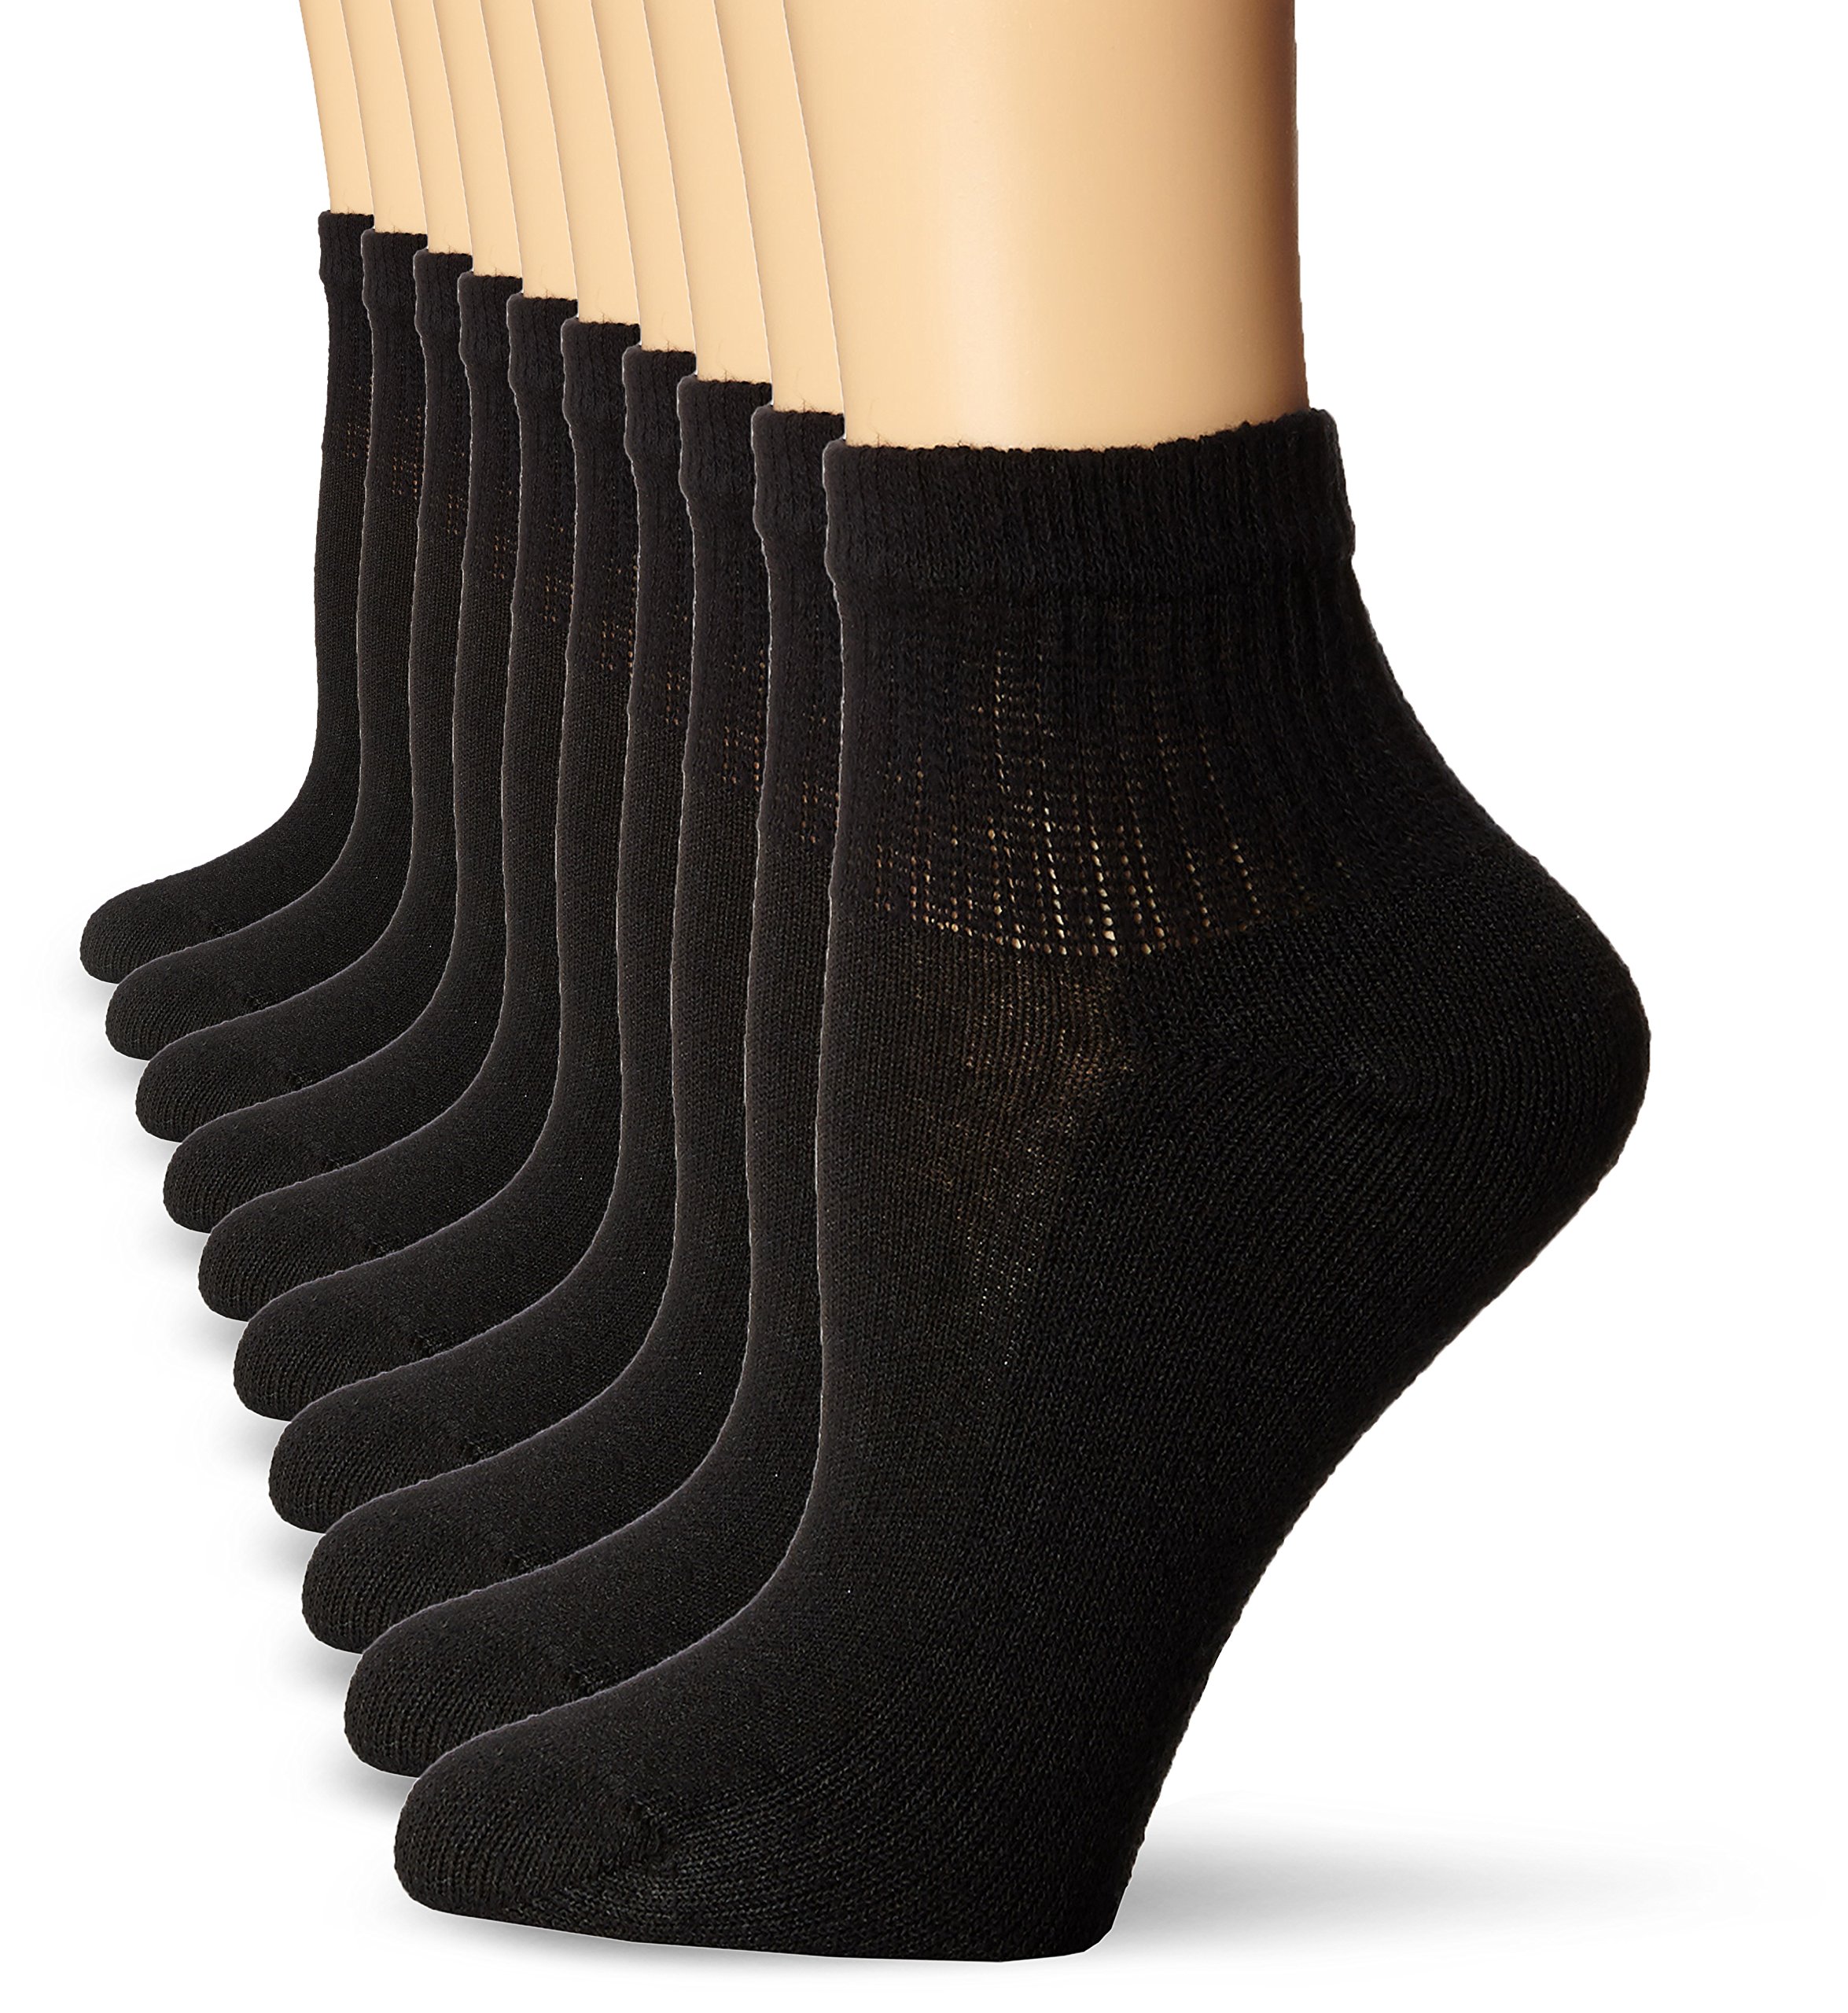 Hanes Women's Value, Ankle Soft Moisture-Wicking Socks, Available in 10 and 14-Packs